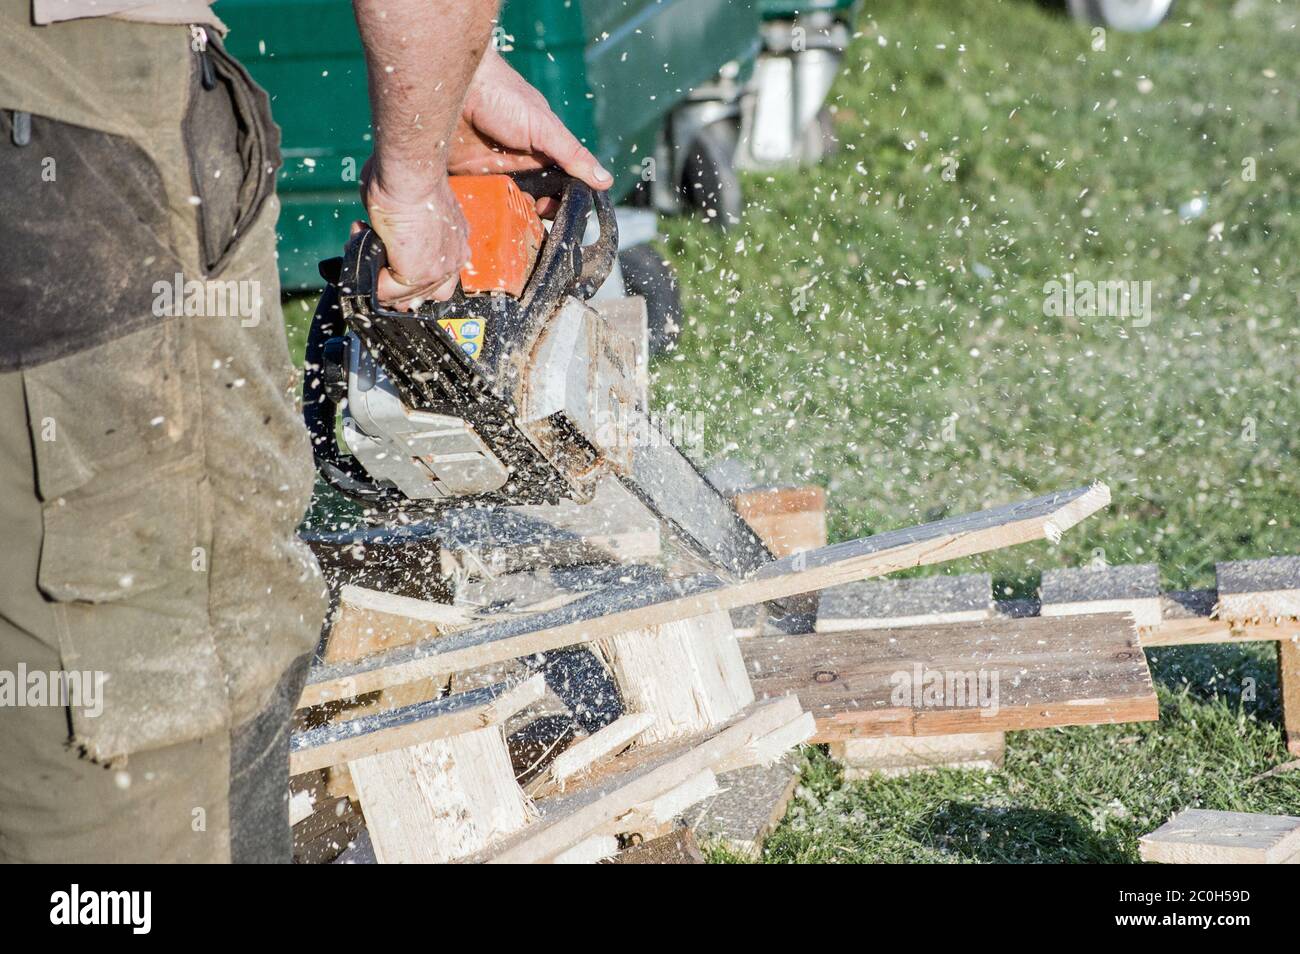 A man using a chainsaw to cut through wooden pallets with sawdust spraying . Stock Photo